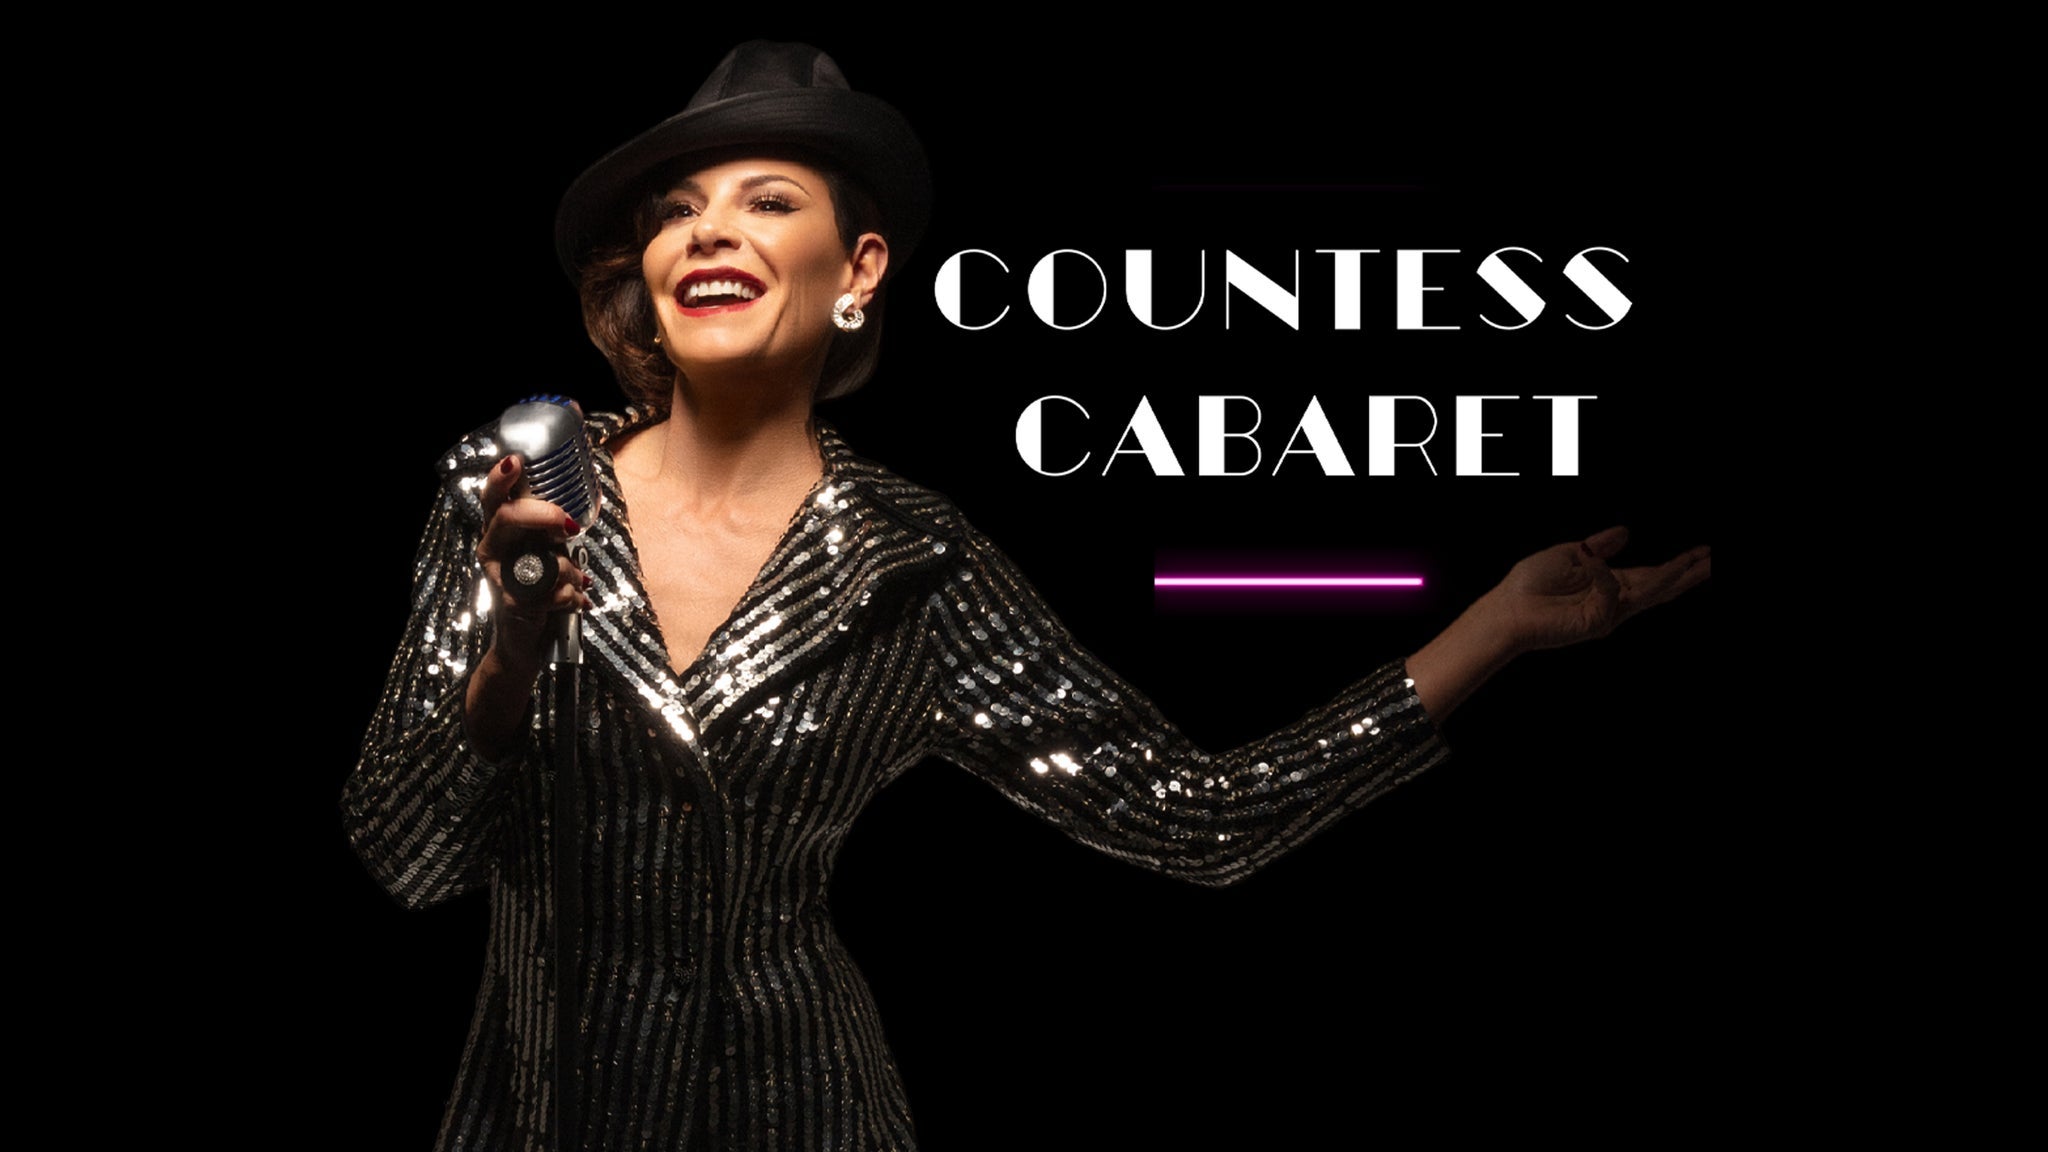 Countess Cabaret Starring Luann de Lesseps presale code for approved tickets in Calgary